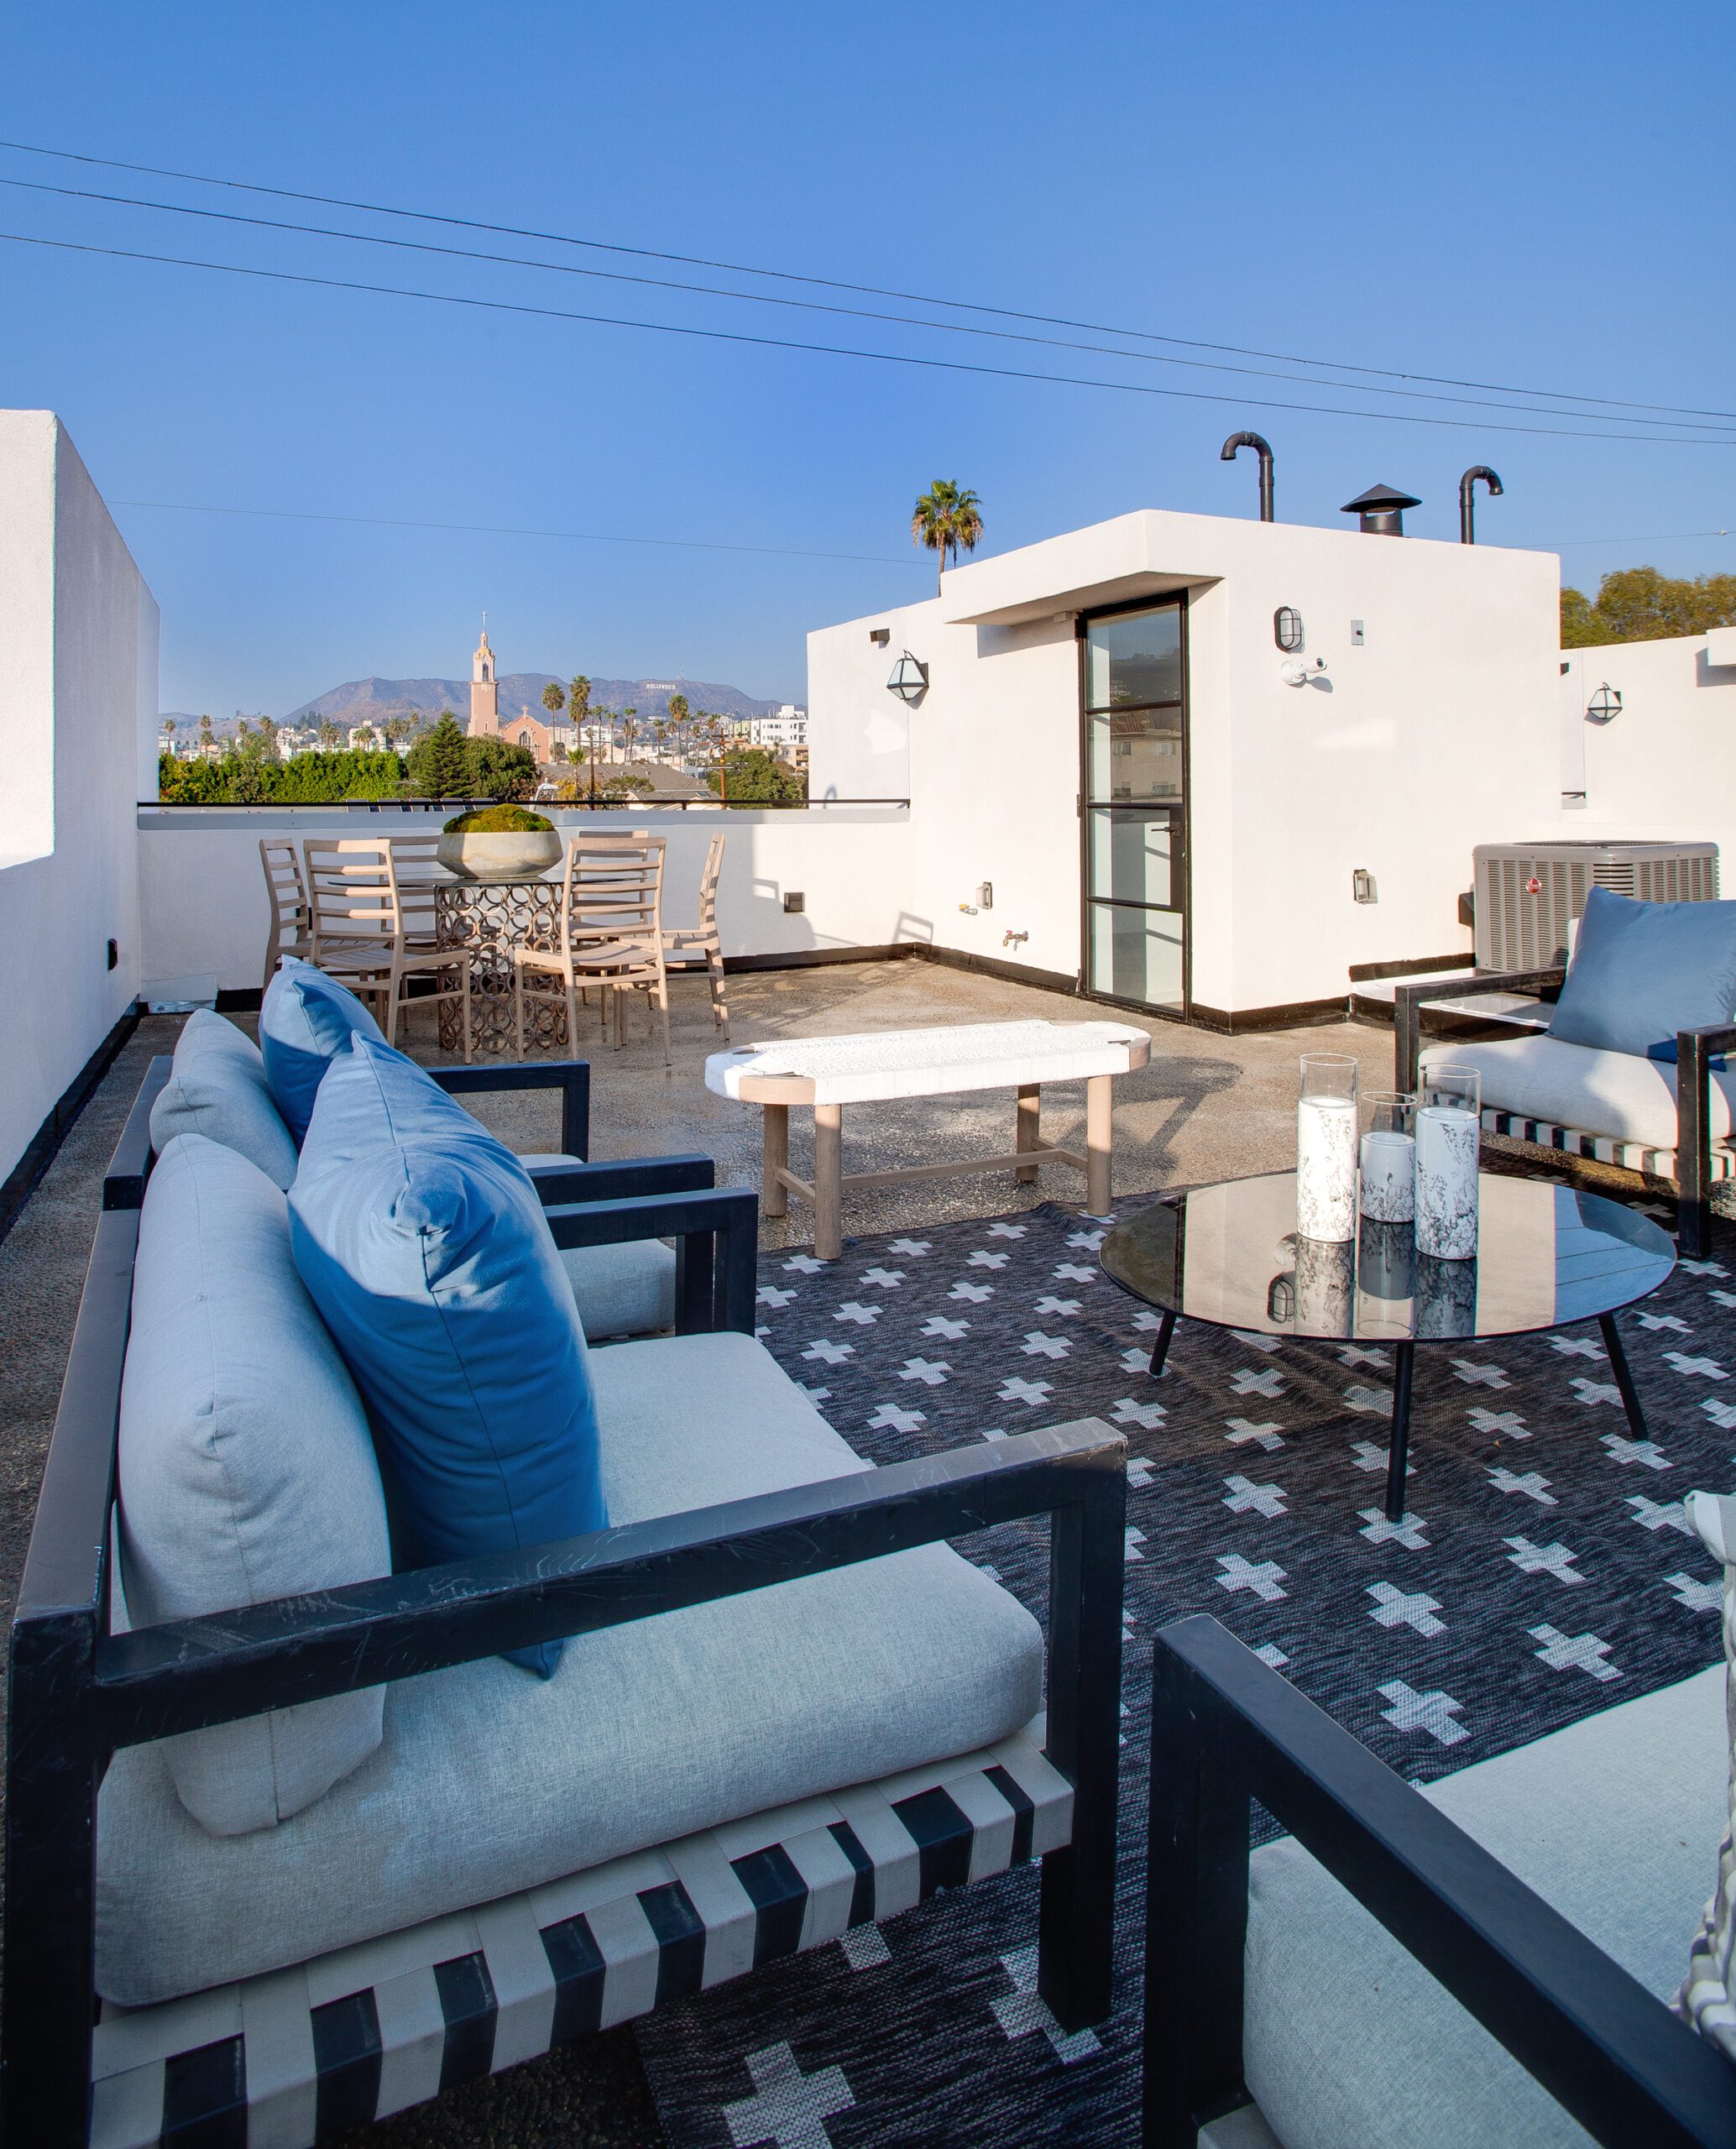 modern rooftop lounge area for residents in California townhouse